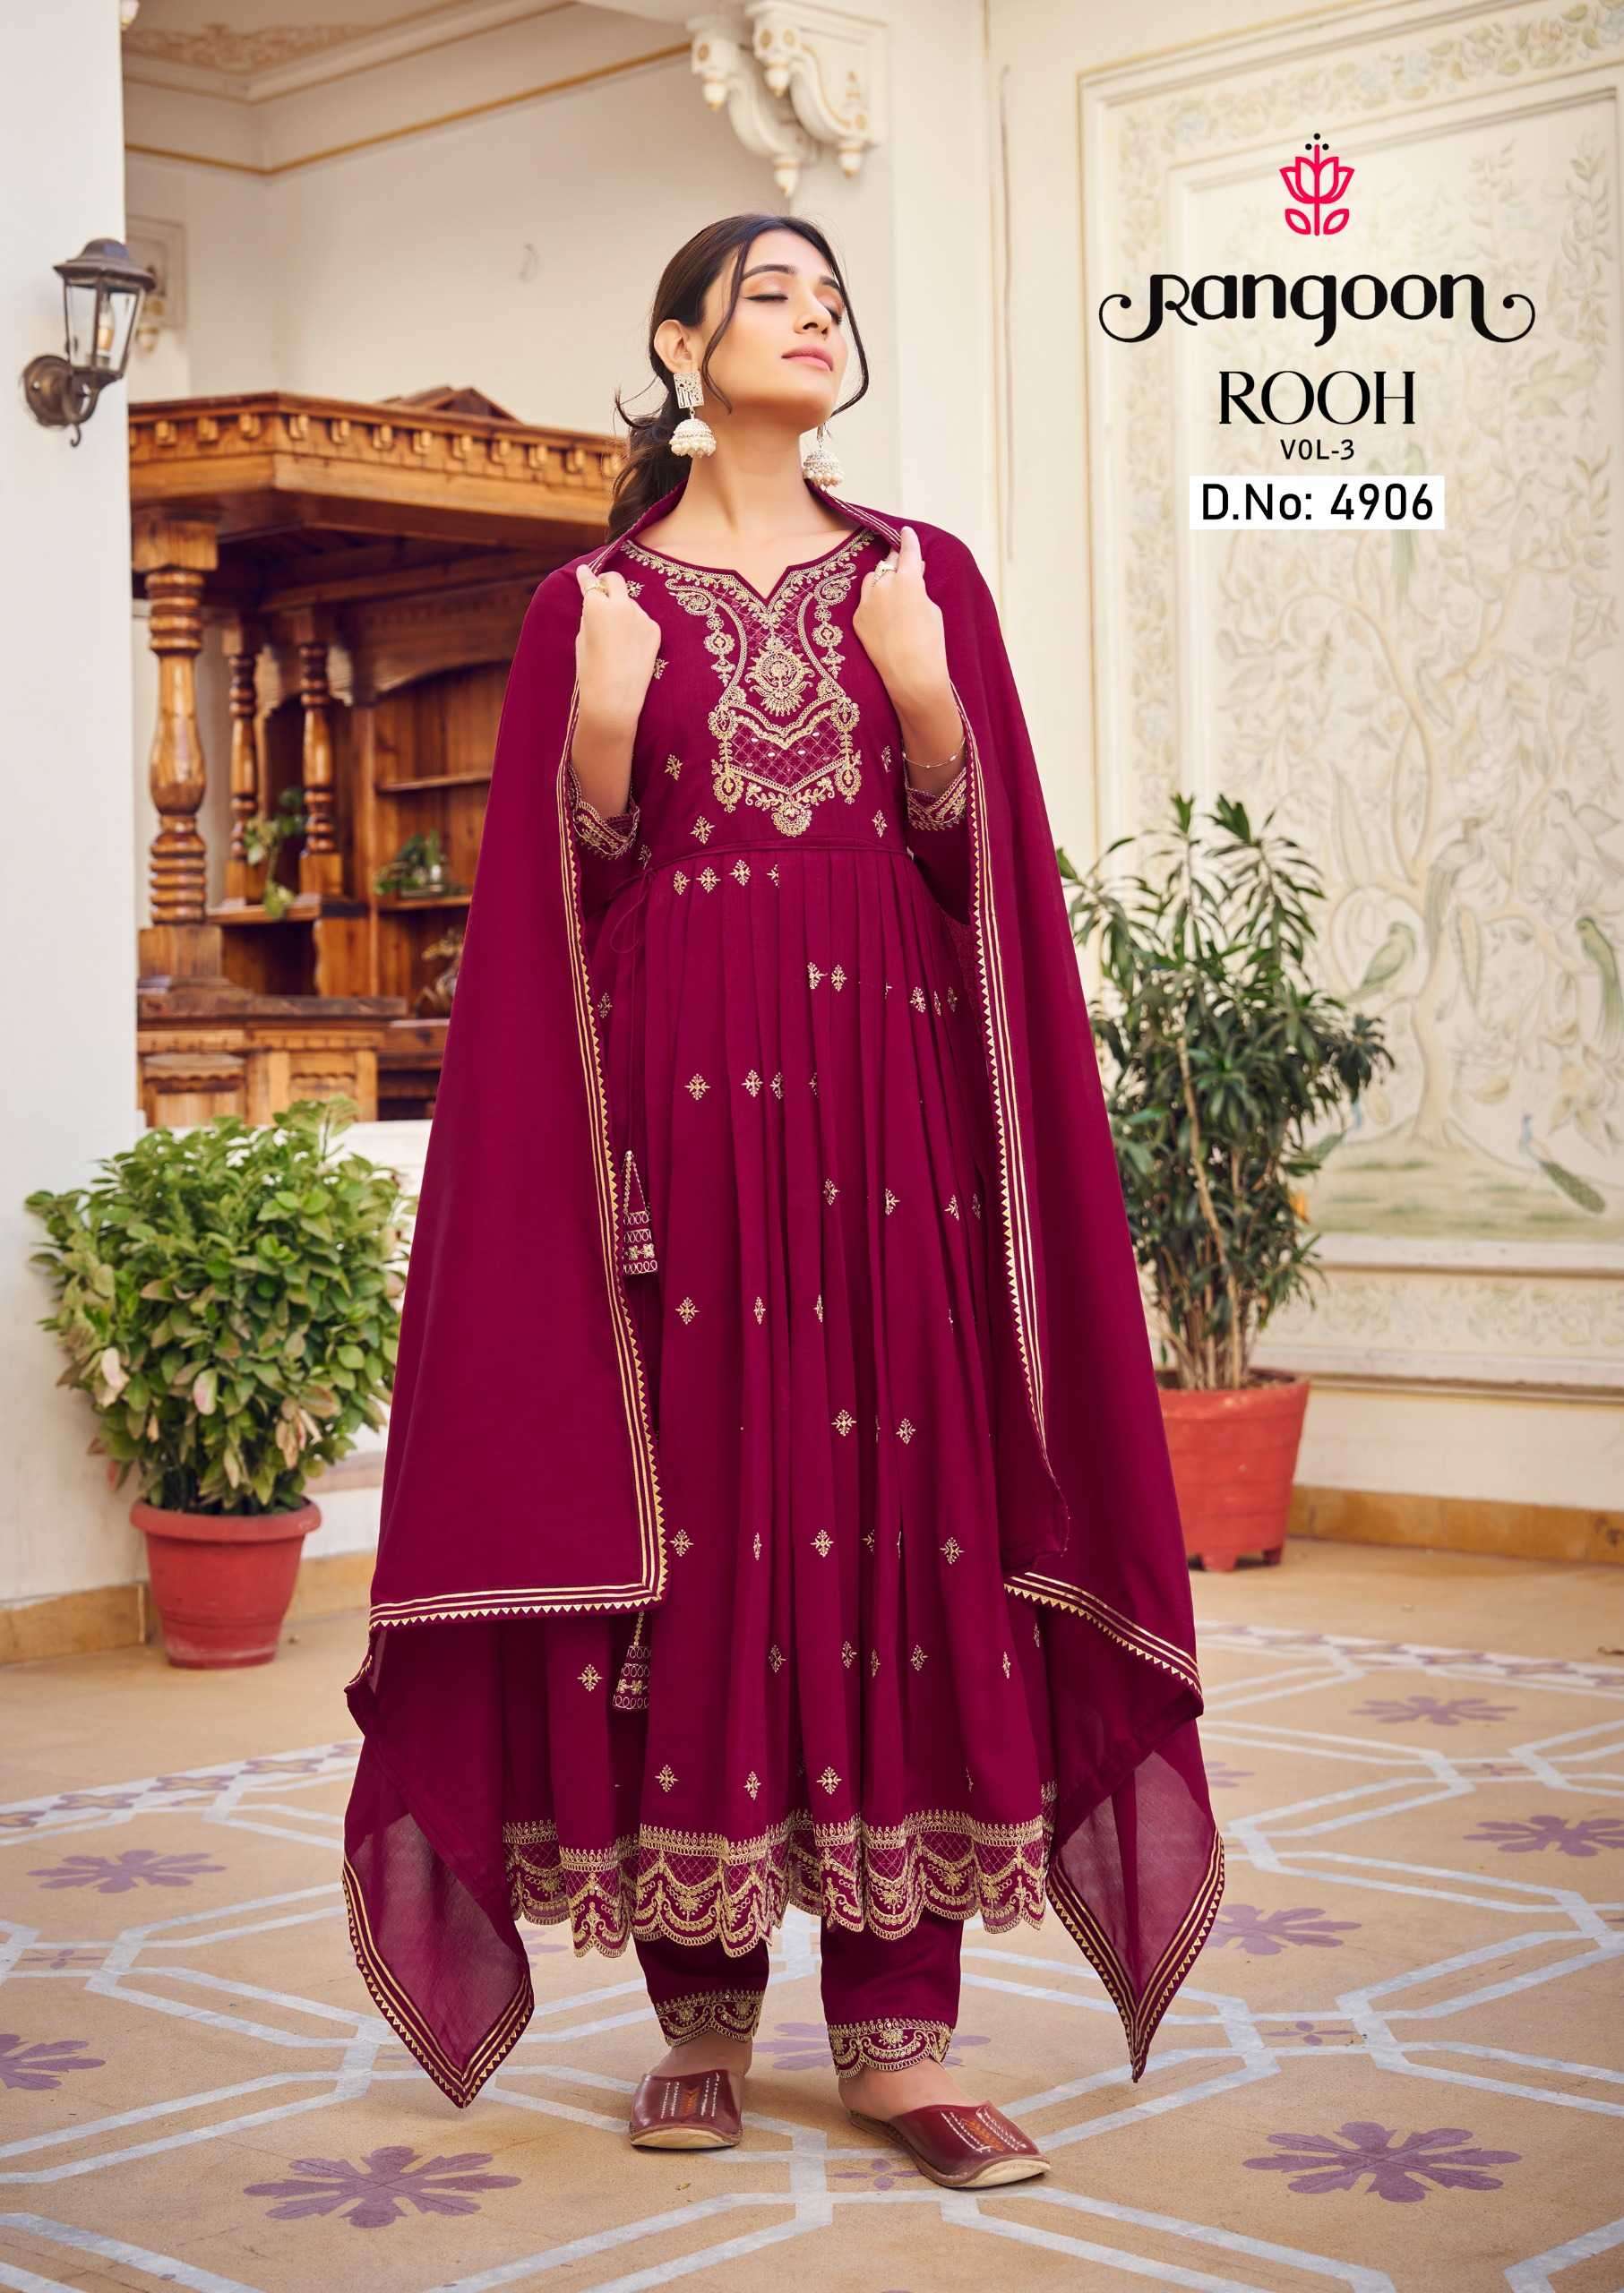 rangoon rooh vol 3 series 4901-4906 Silk with Fancy Embroidery suit